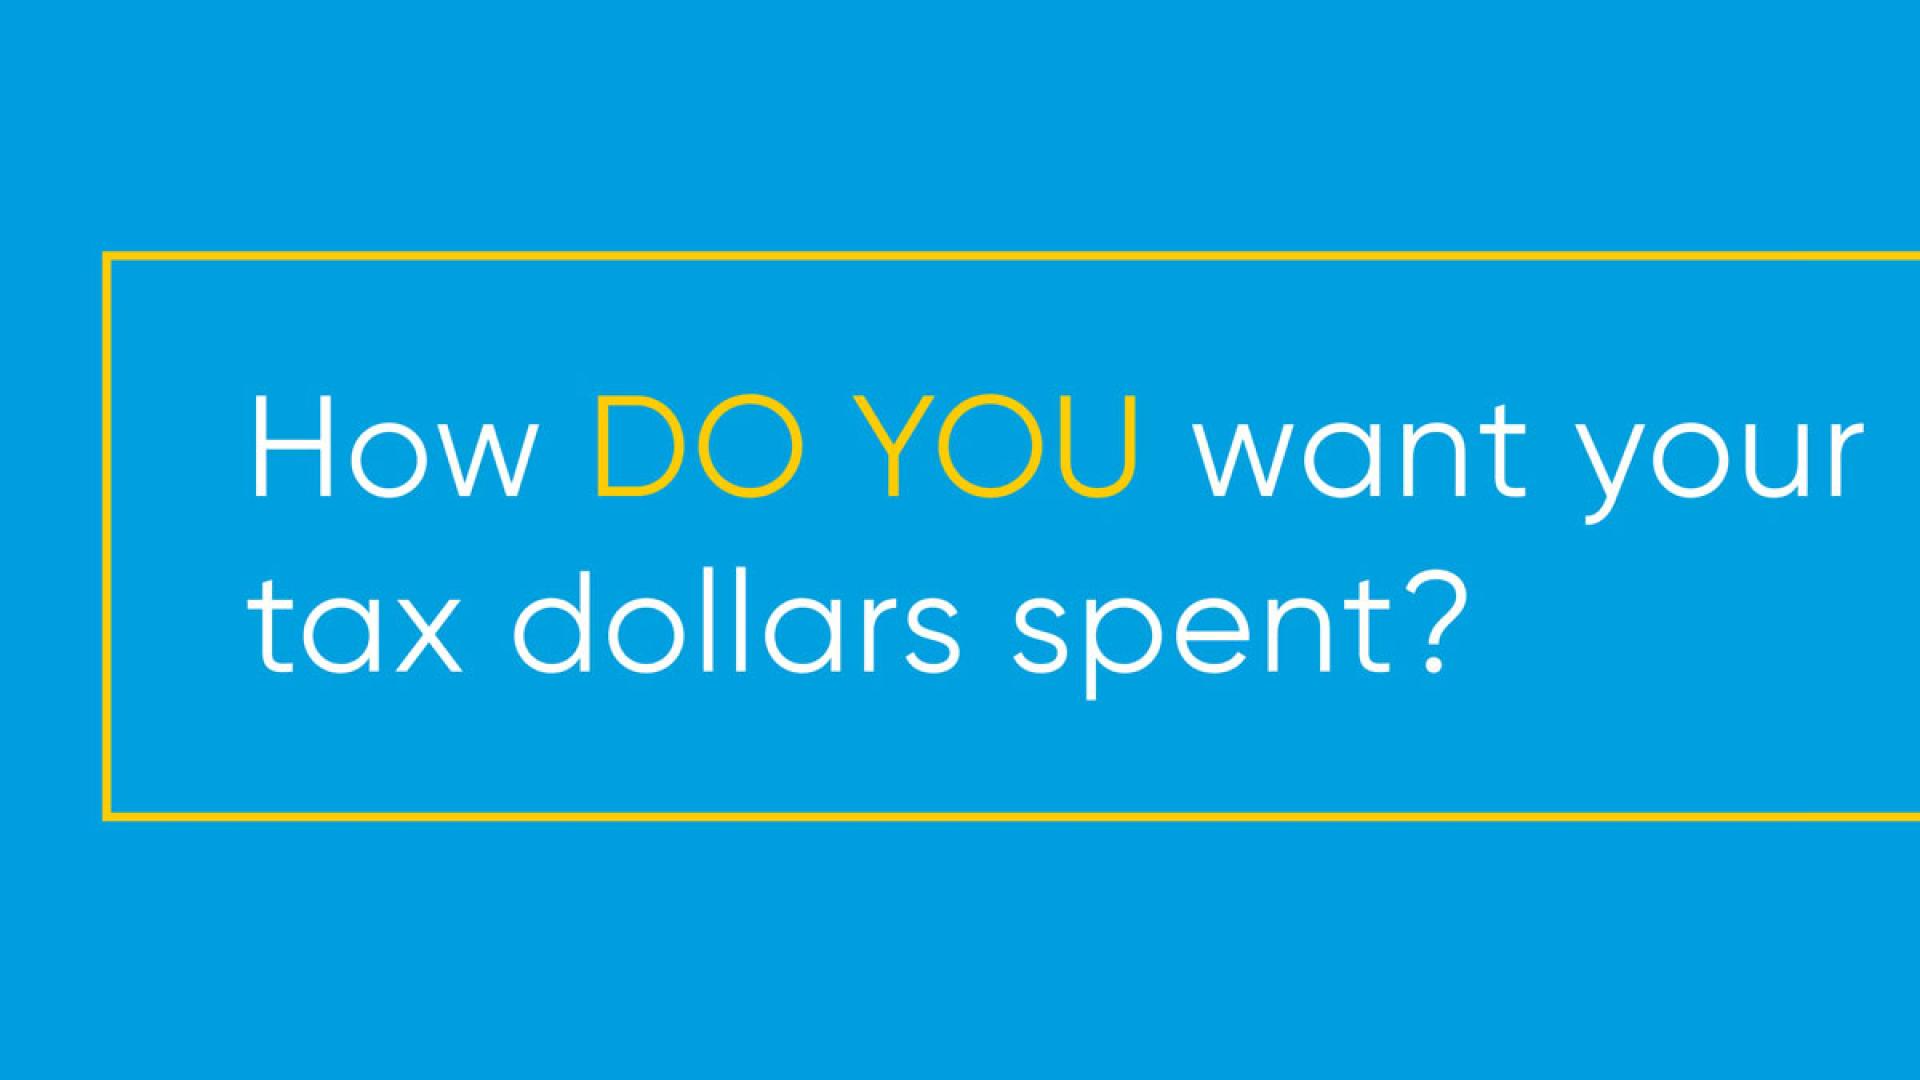 How do you want your tax dollars spent?